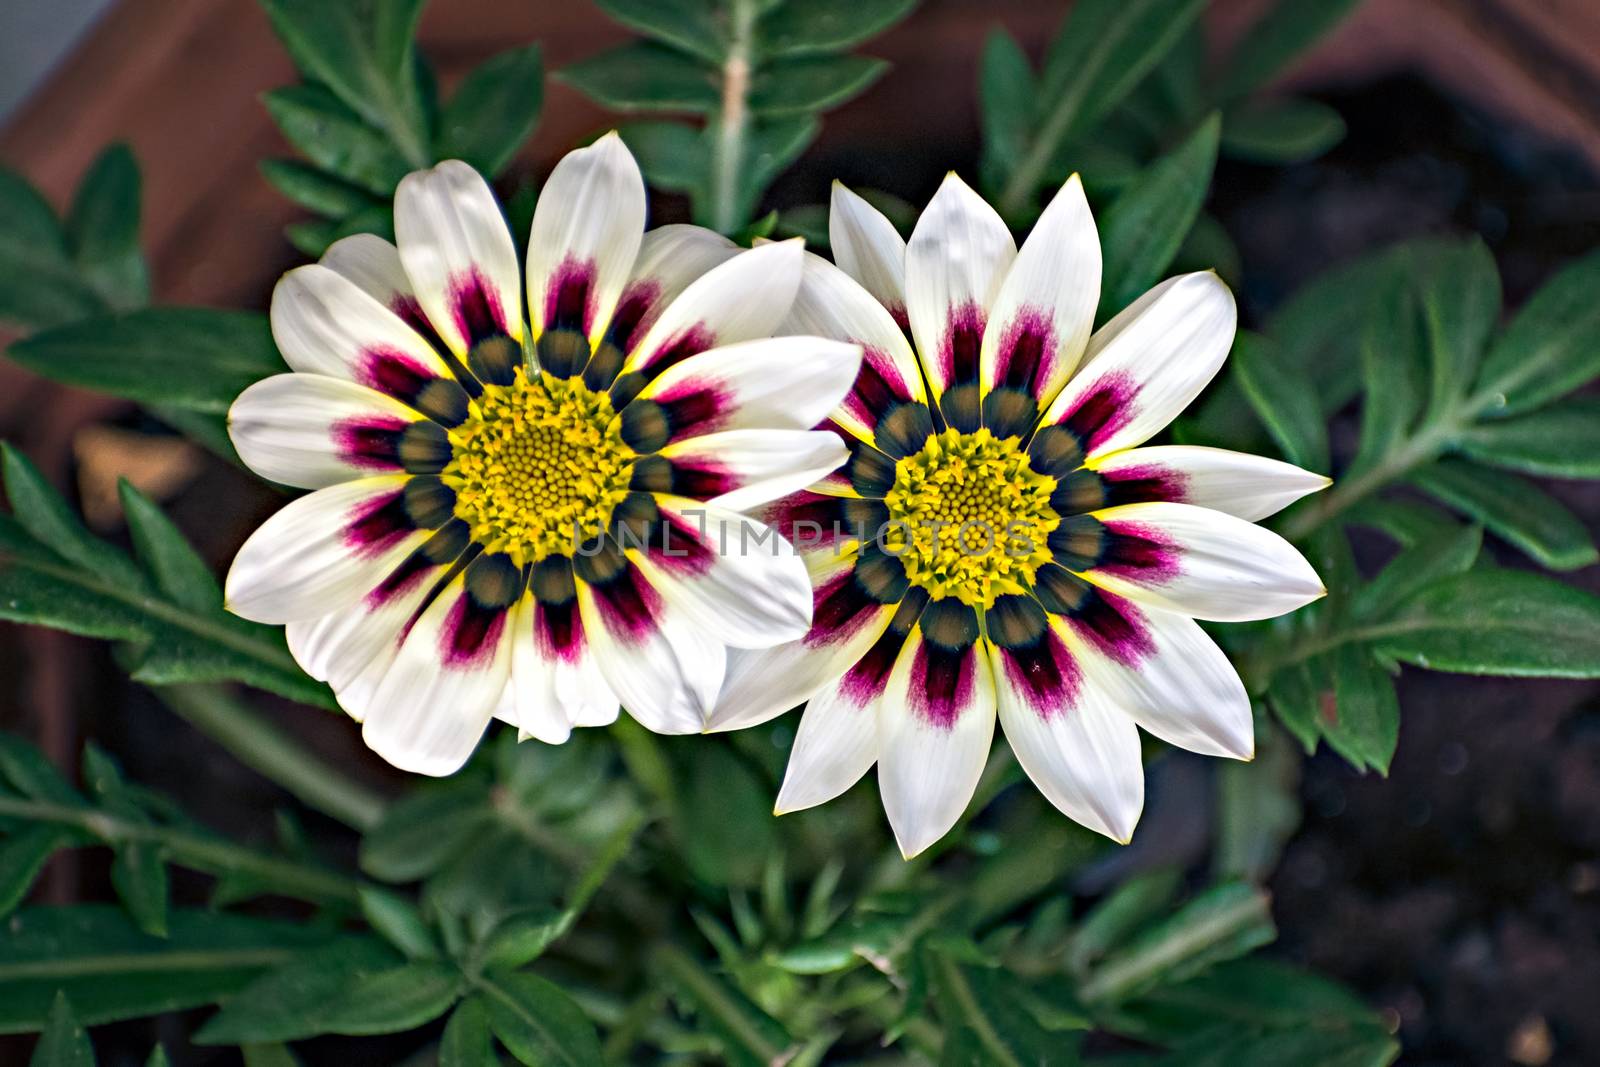 Isolated, close-up image of two white and pink Gazania flower with yellow center. by lalam